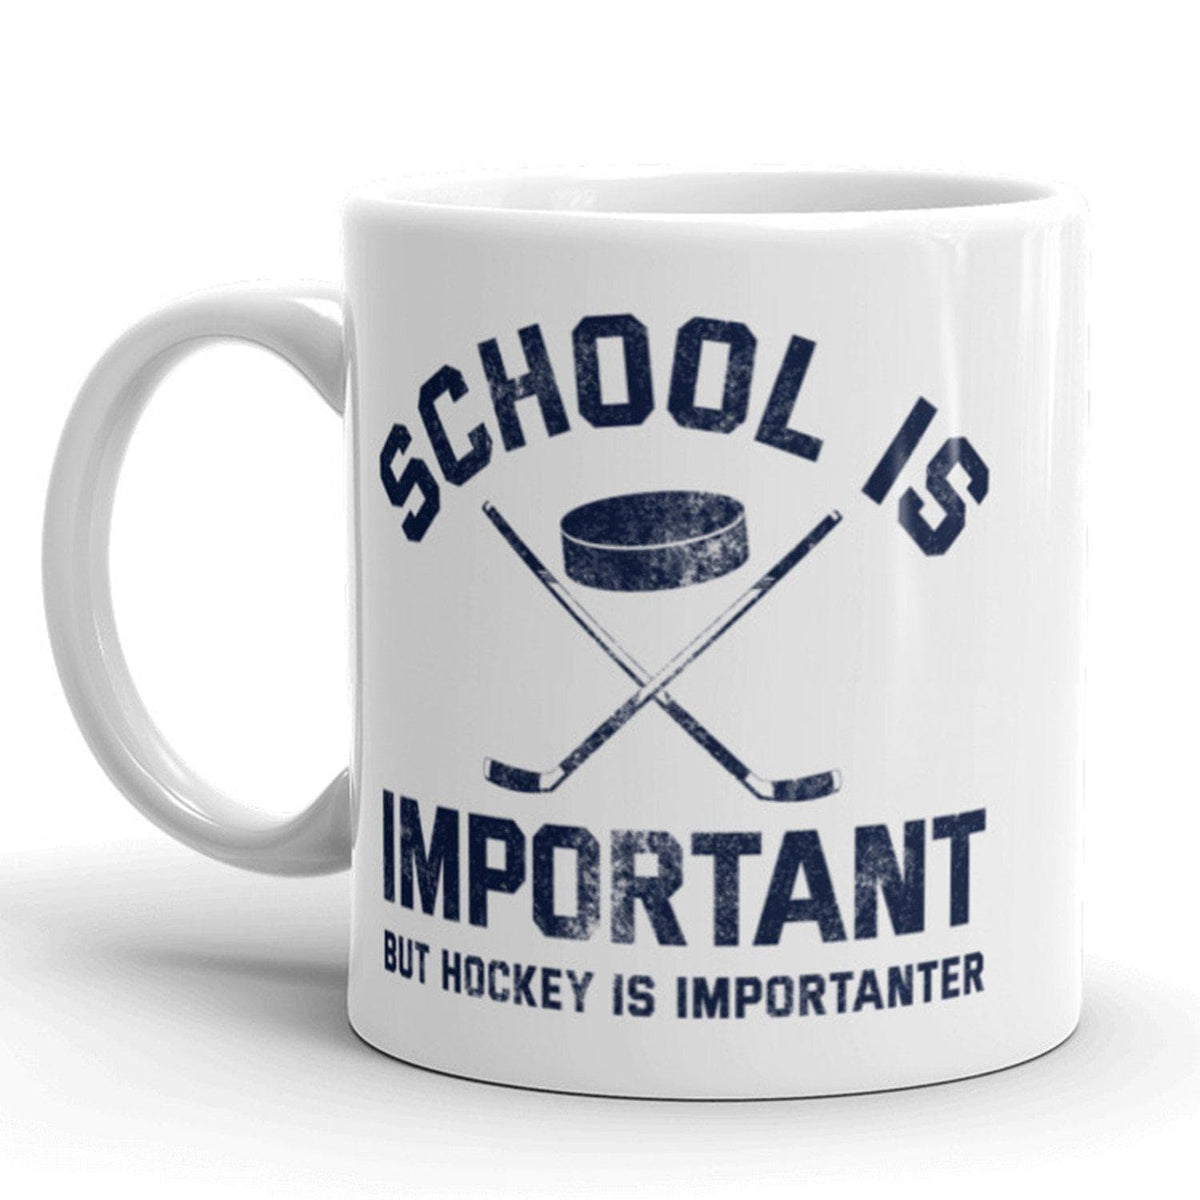 School Is Important But Hockey Is Importanter Mug - Crazy Dog T-Shirts